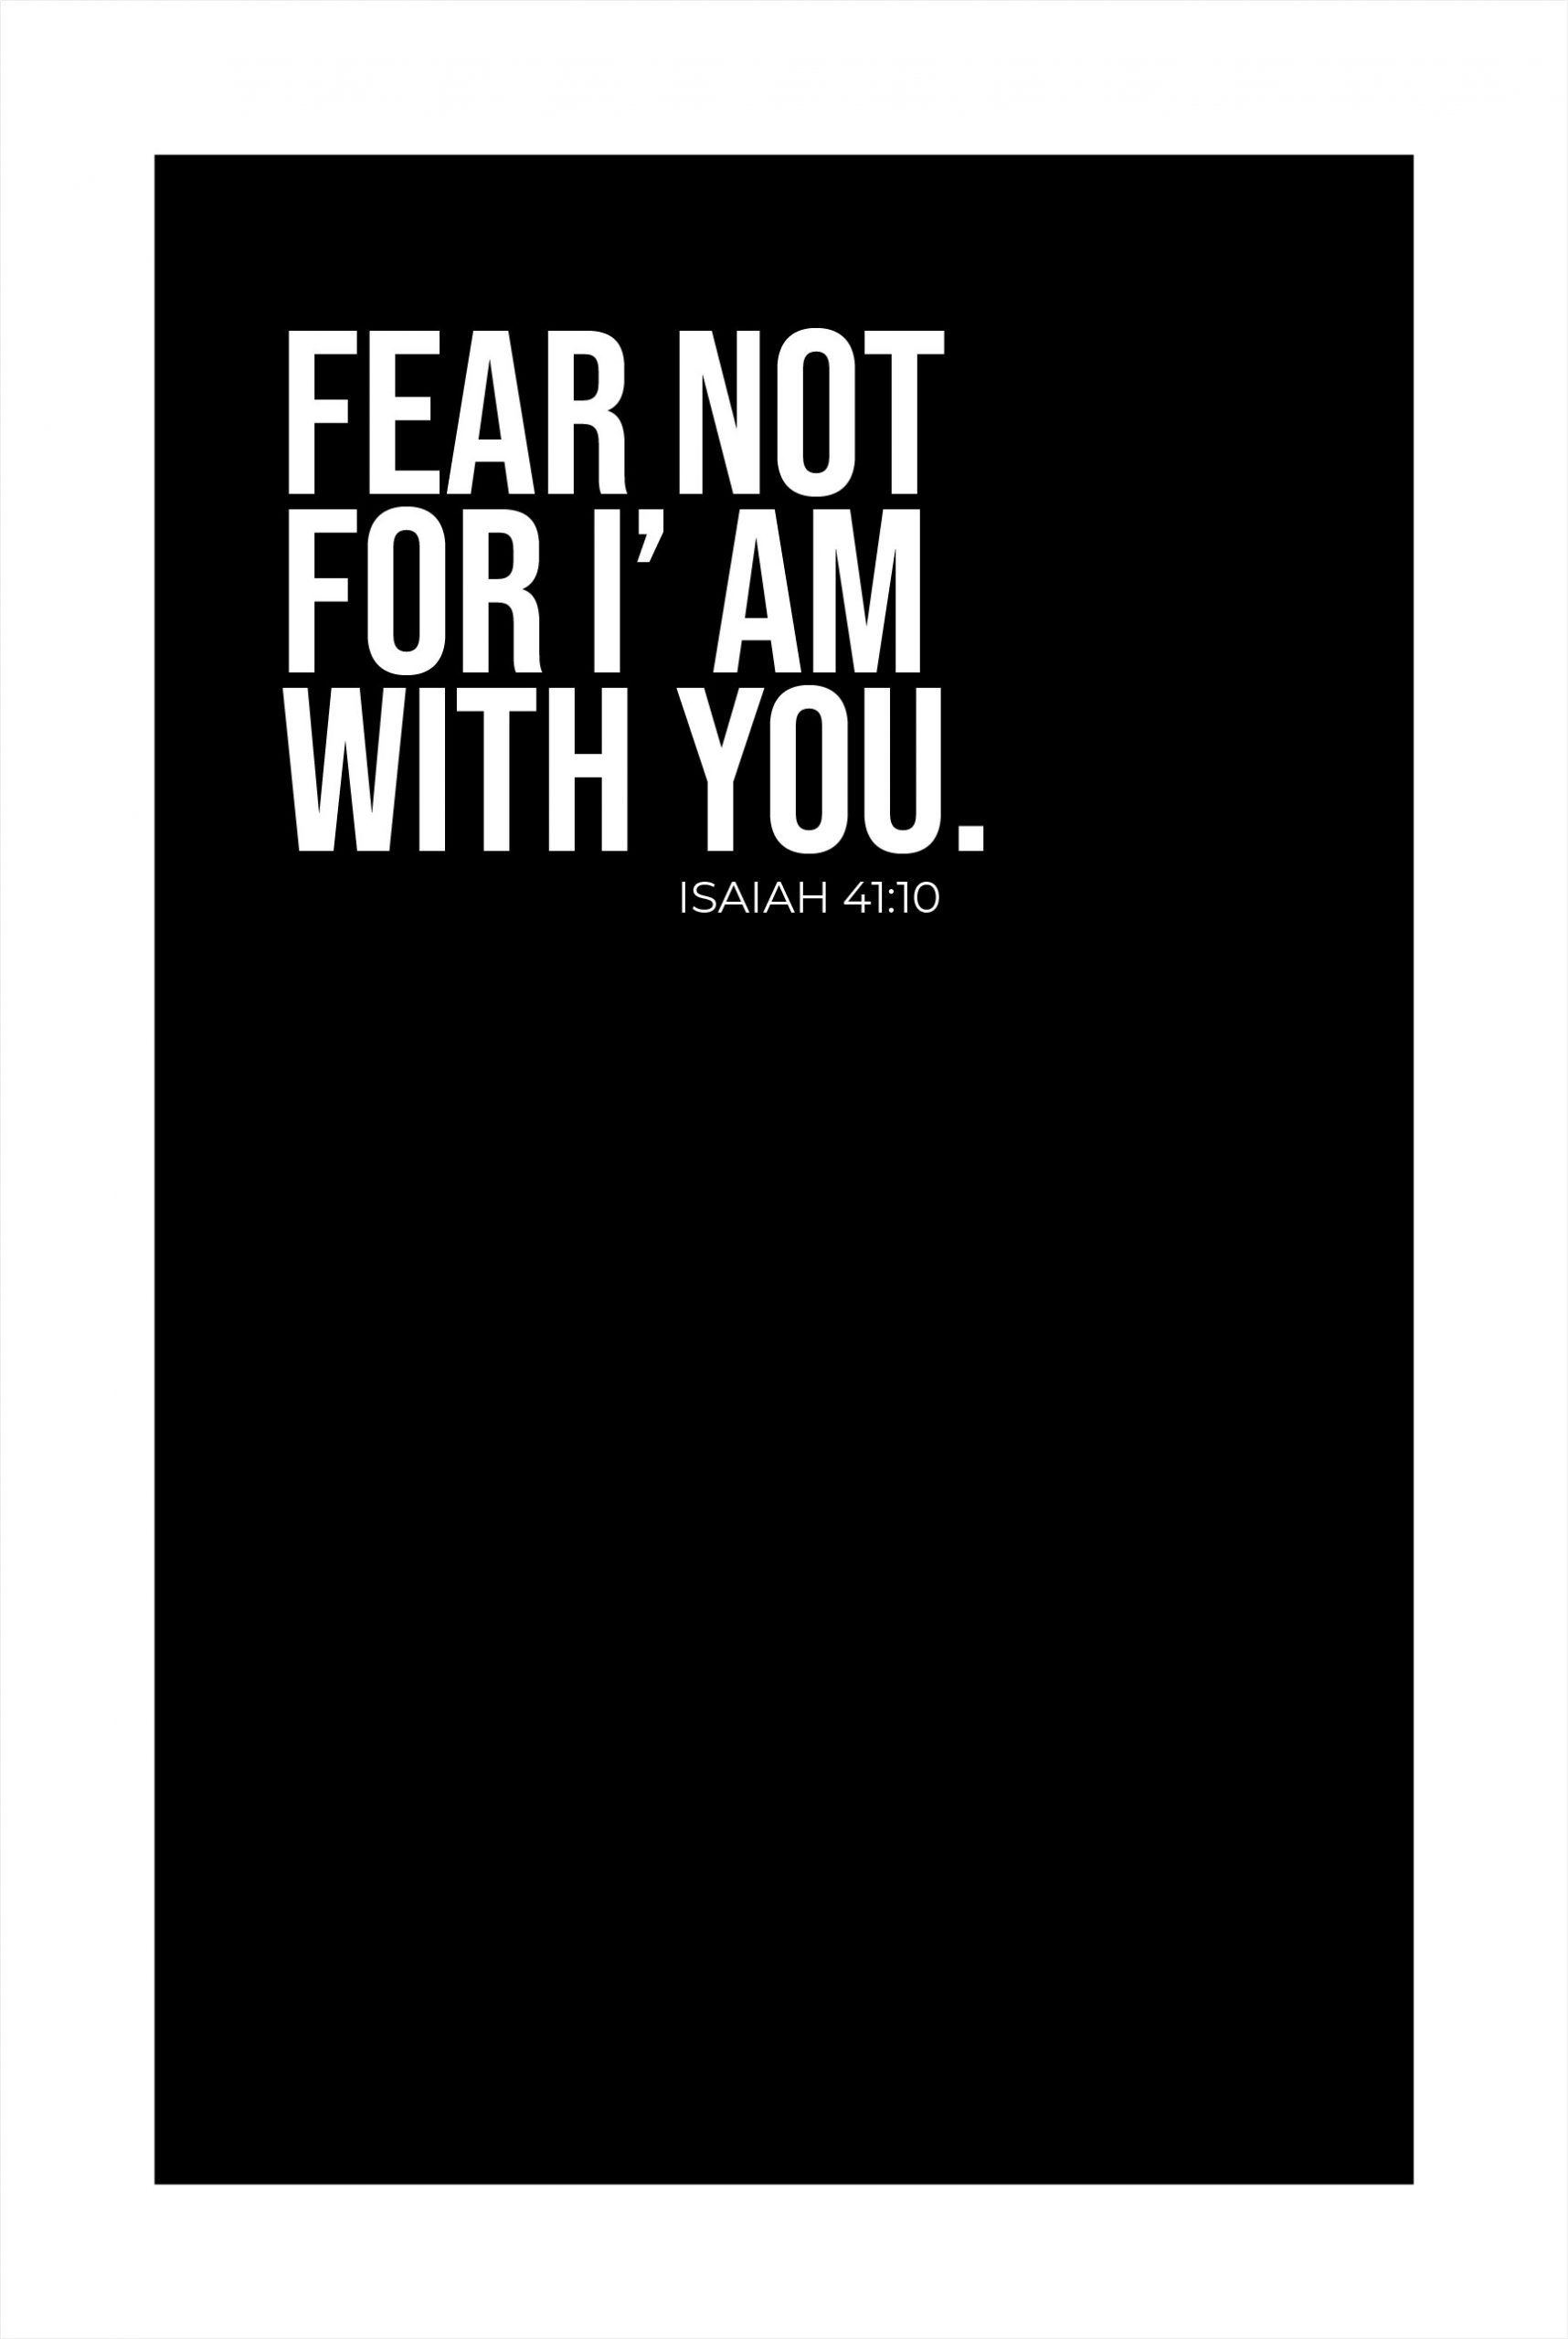 Fear not for I am with you poster